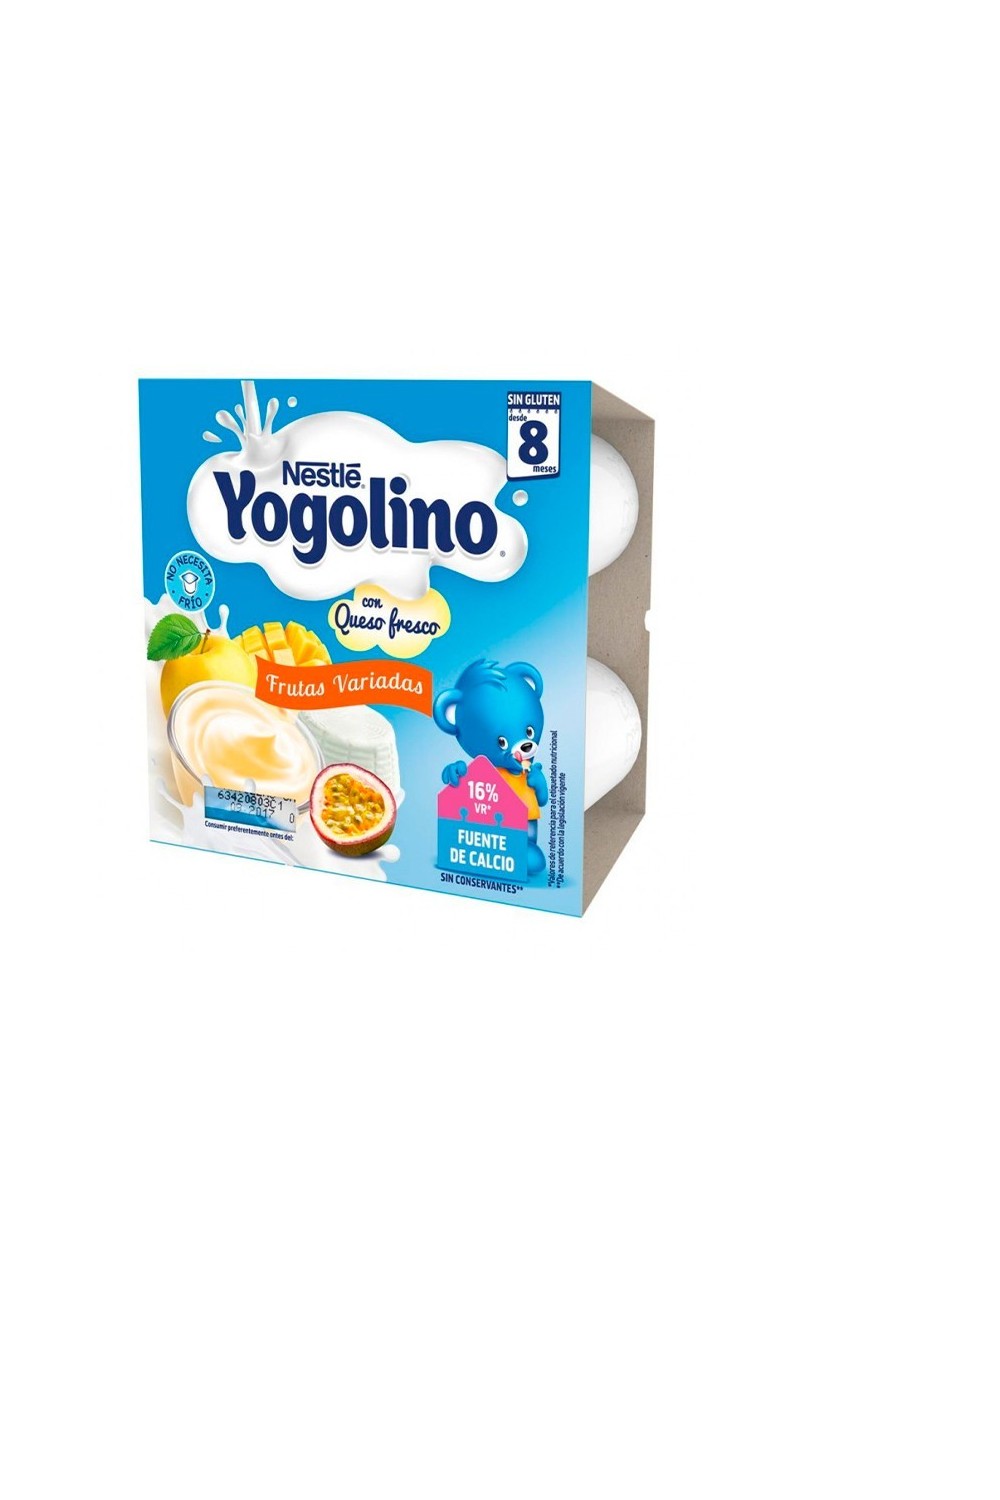 NESTLE - Nestlé Yogolino Fresh Cheese With Assorted Fruits 4x100g